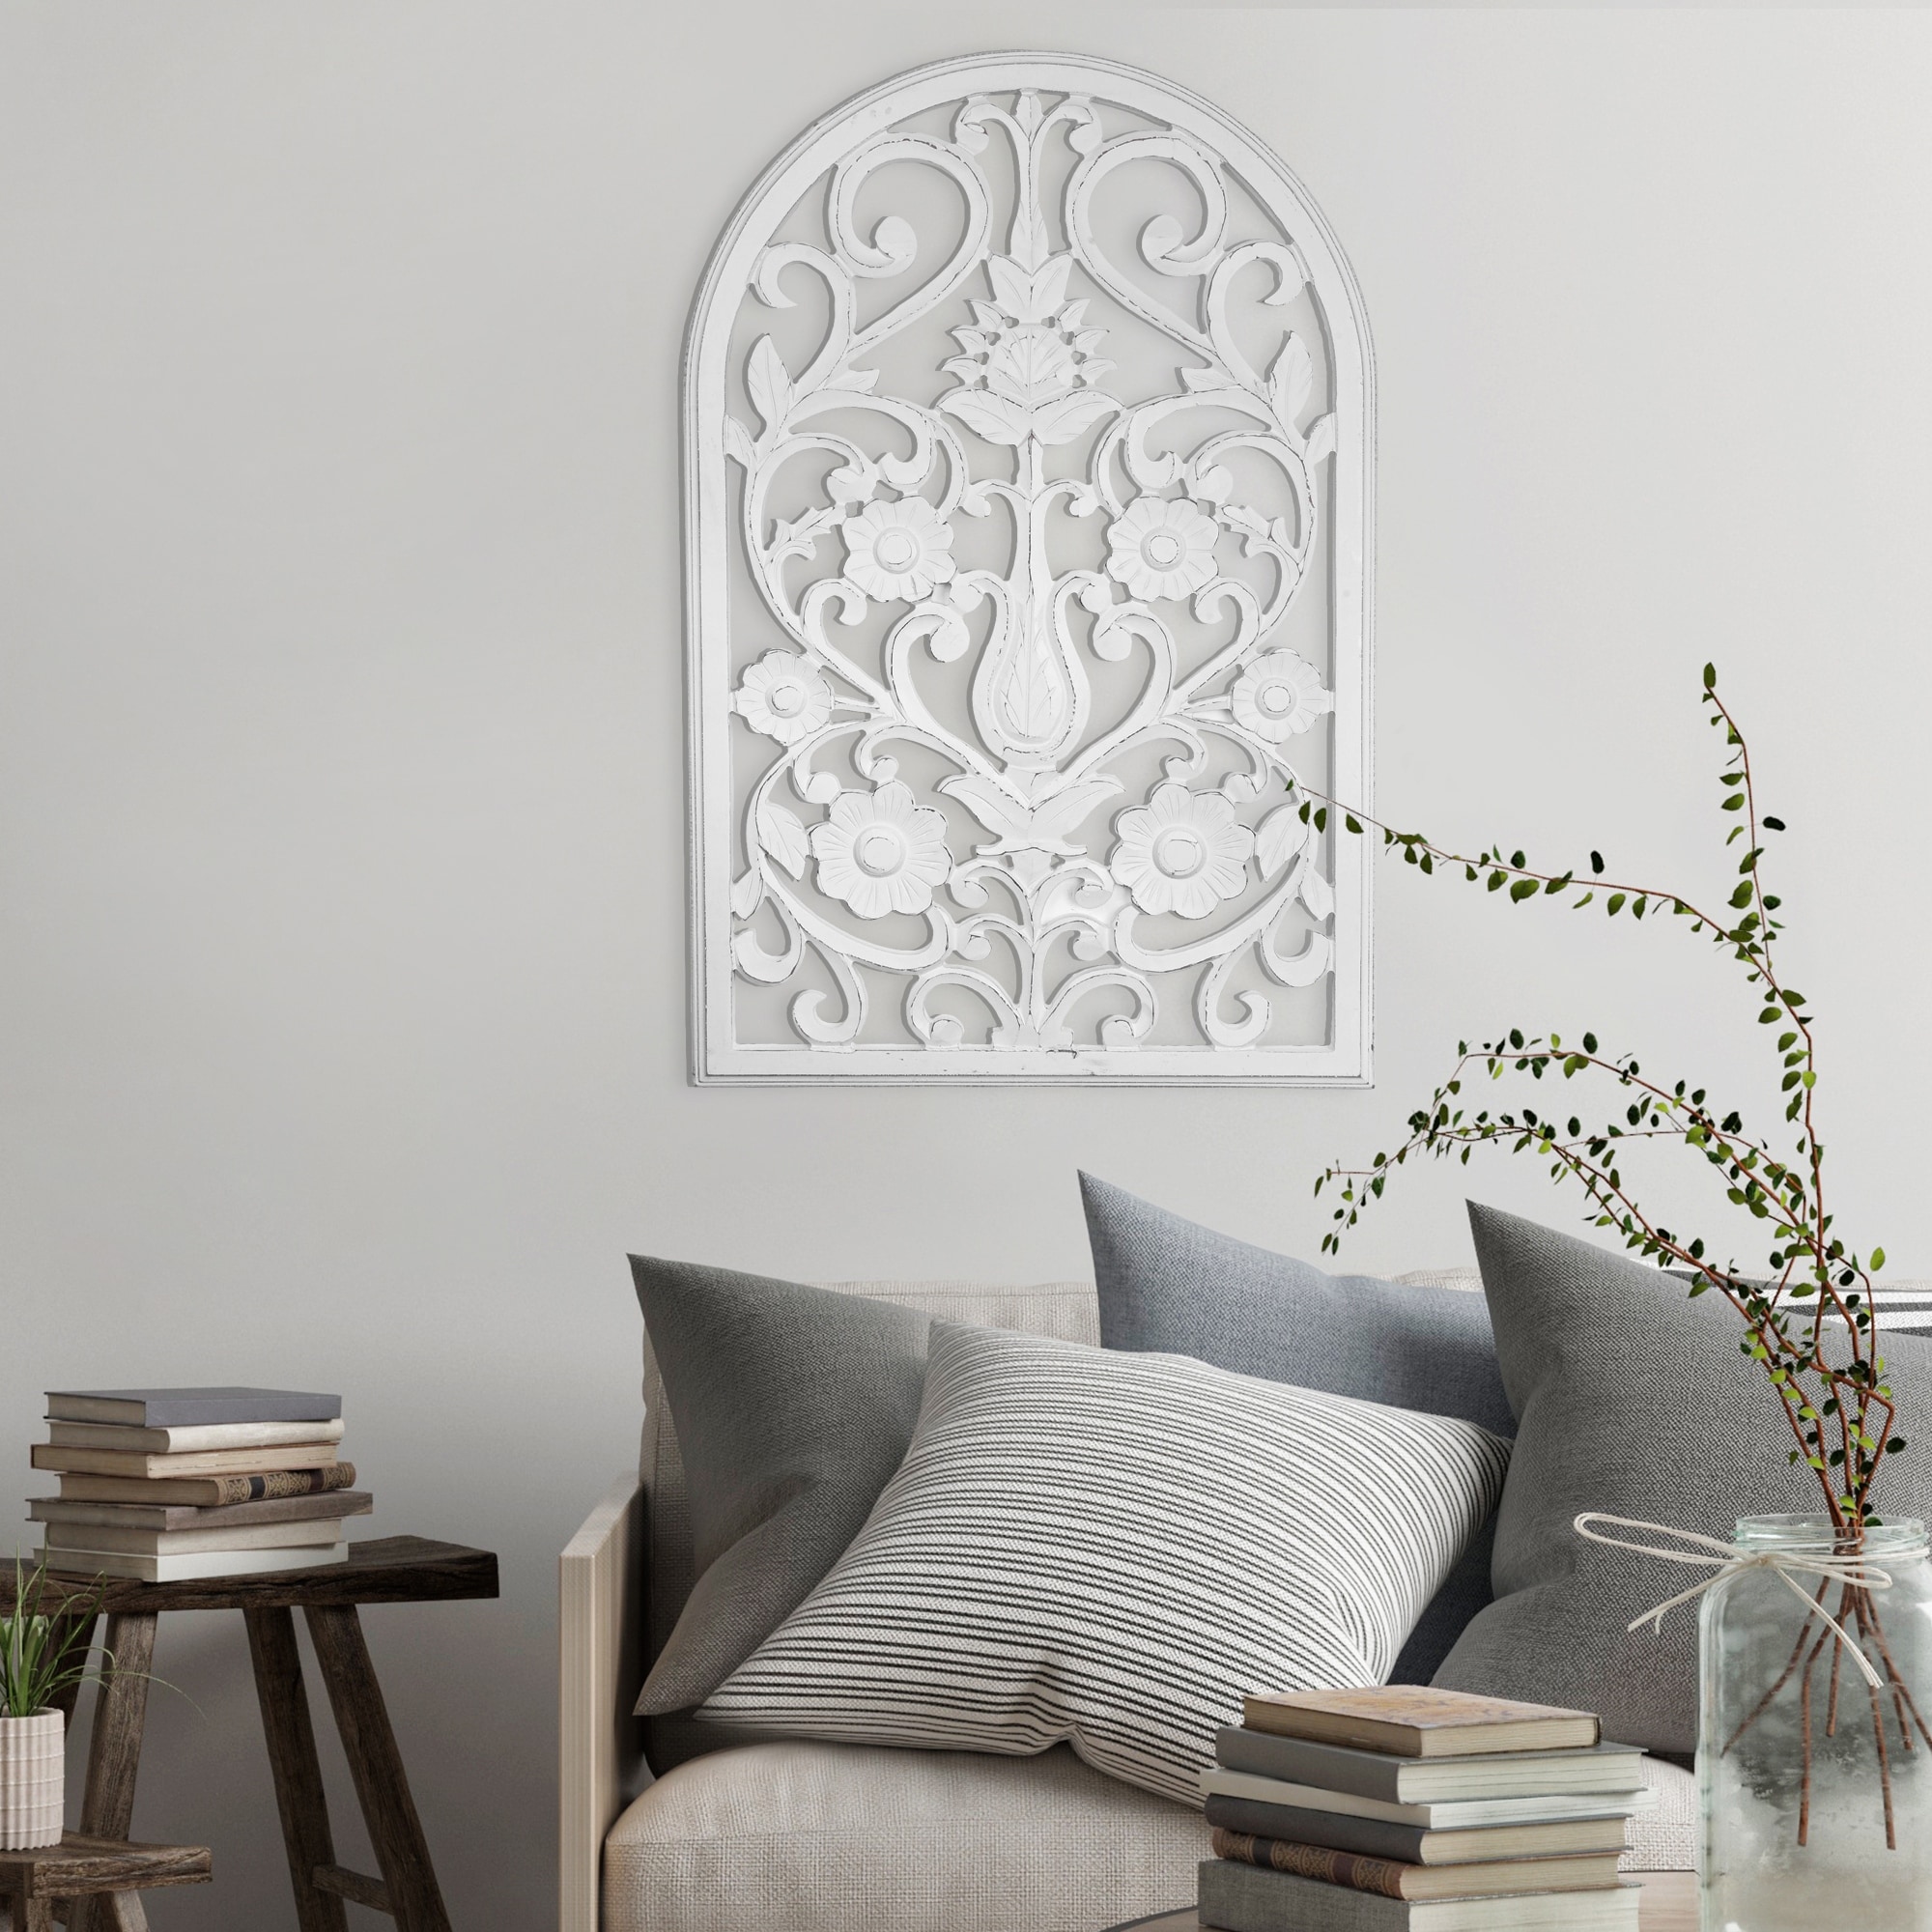 Wall Decor Wall Accents - Bed Bath & Beyond